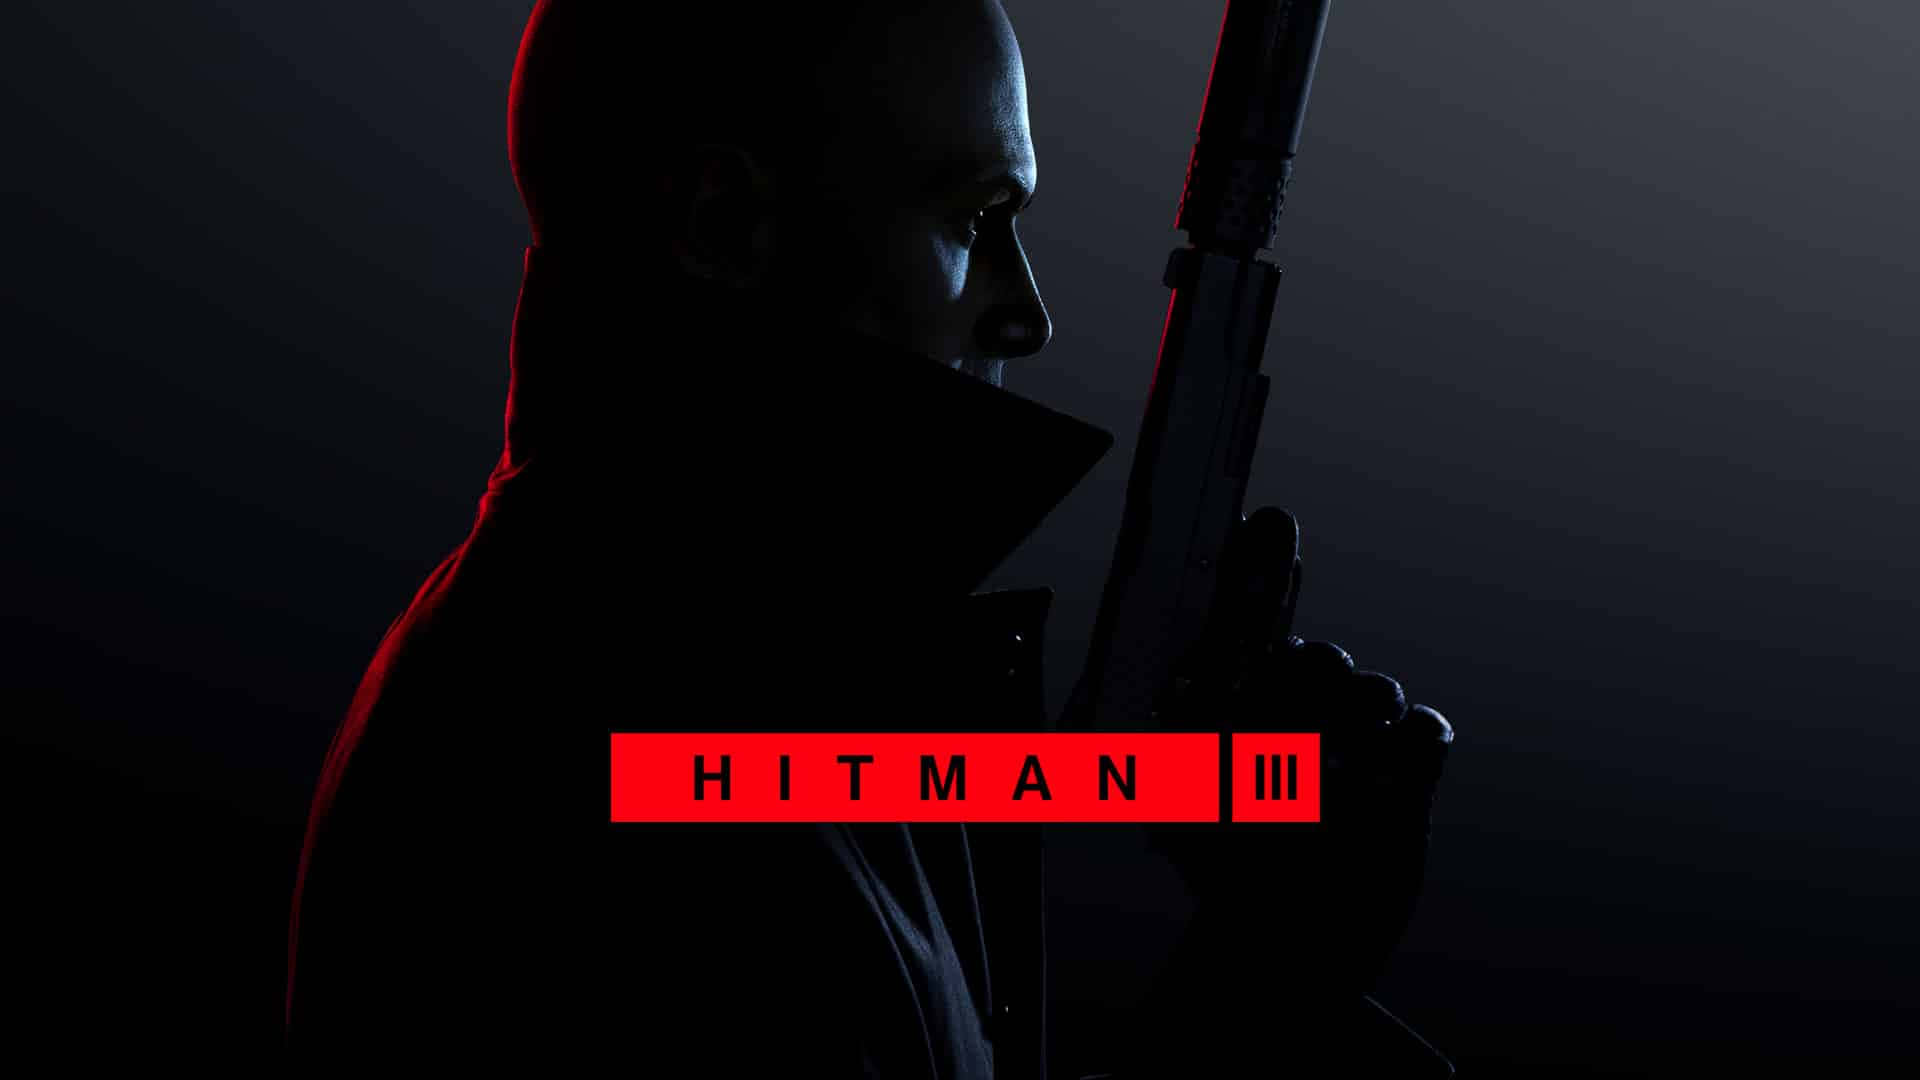 Agent 47 takes aim in the thrilling video game "Hitman 2"